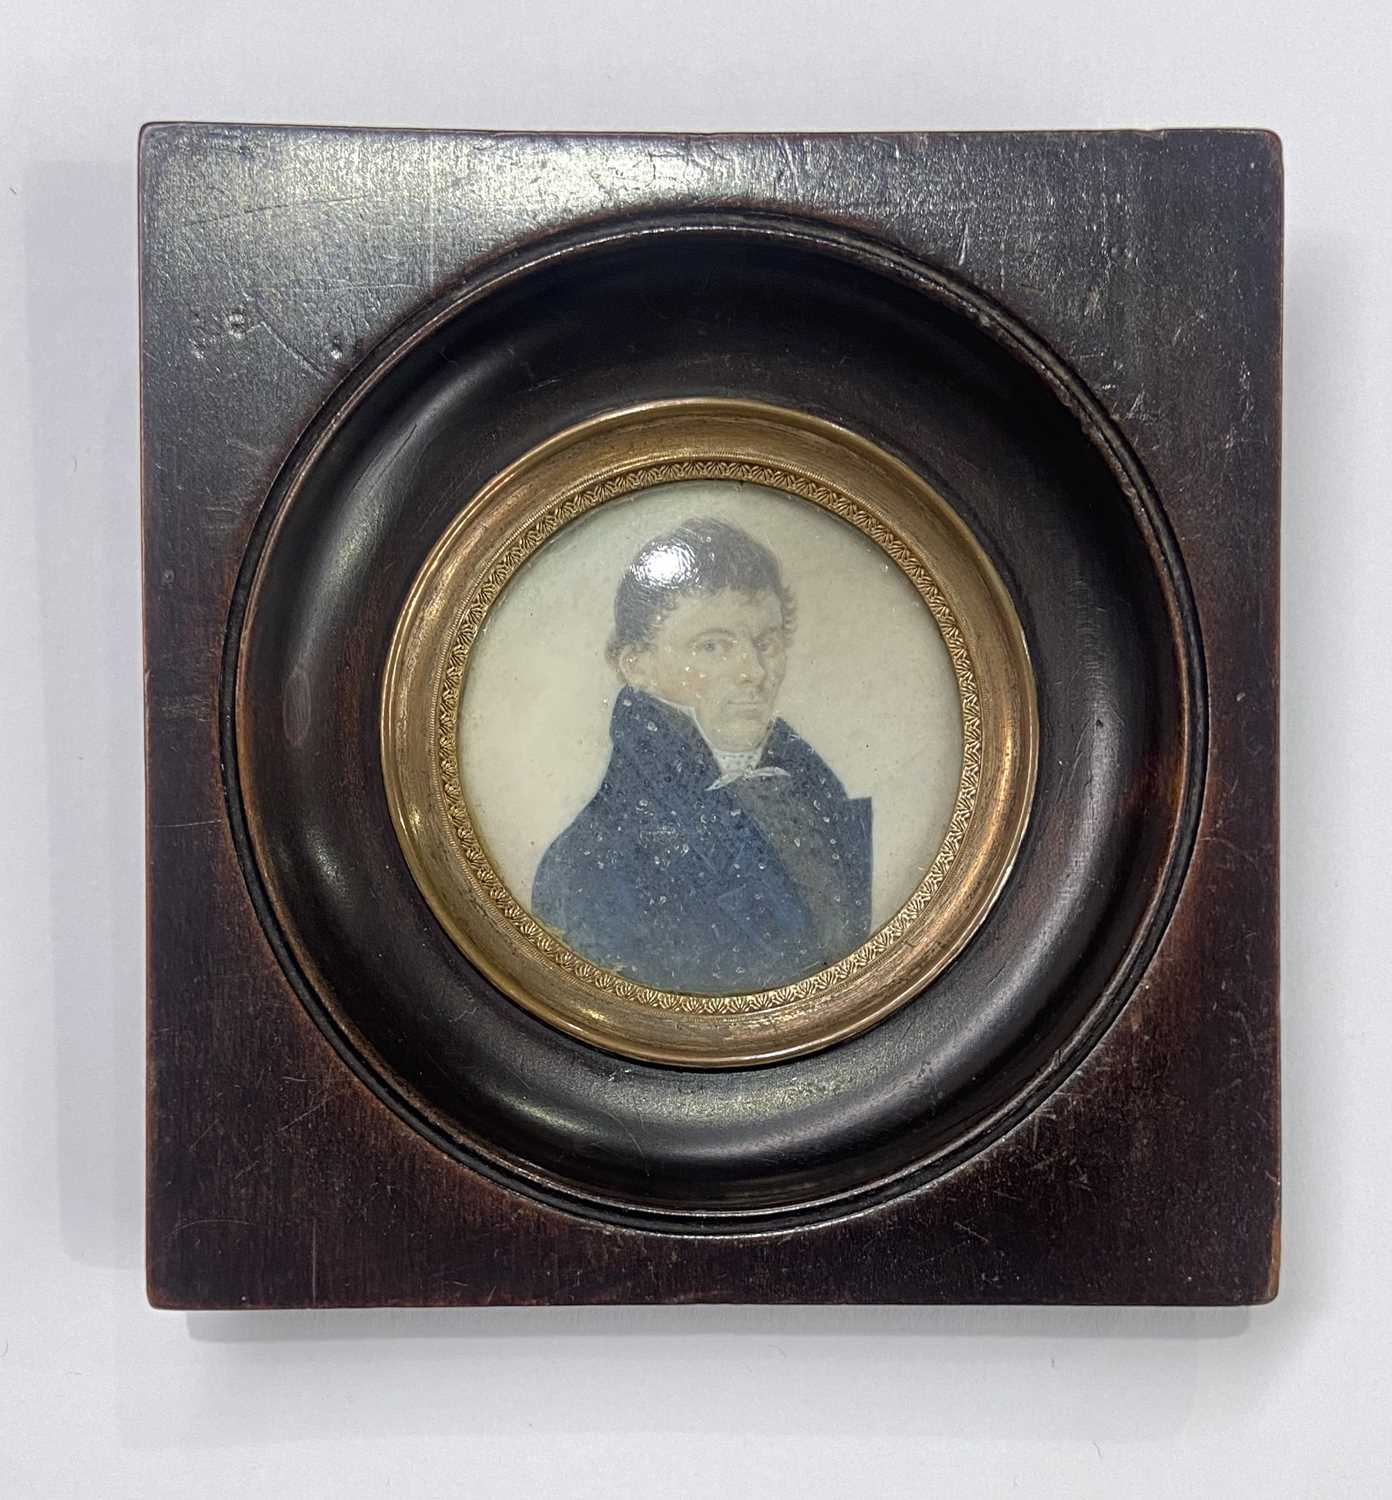 An early 19th century portrait miniature painted to depict a man in a high-collared blue coat, on